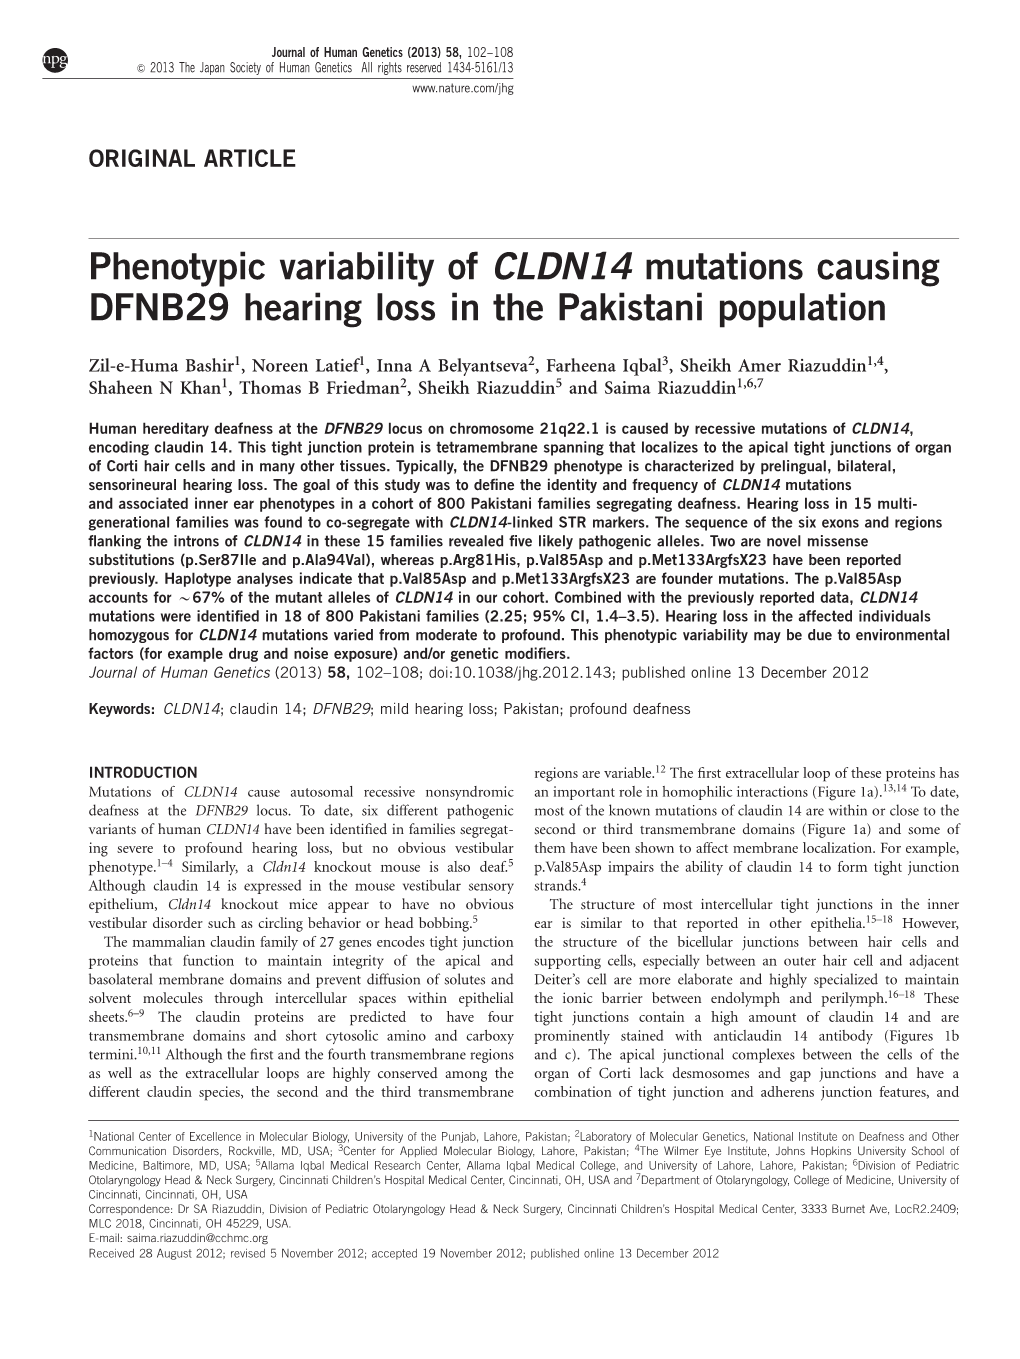 Phenotypic Variability of CLDN14 Mutations Causing DFNB29 Hearing Loss in the Pakistani Population